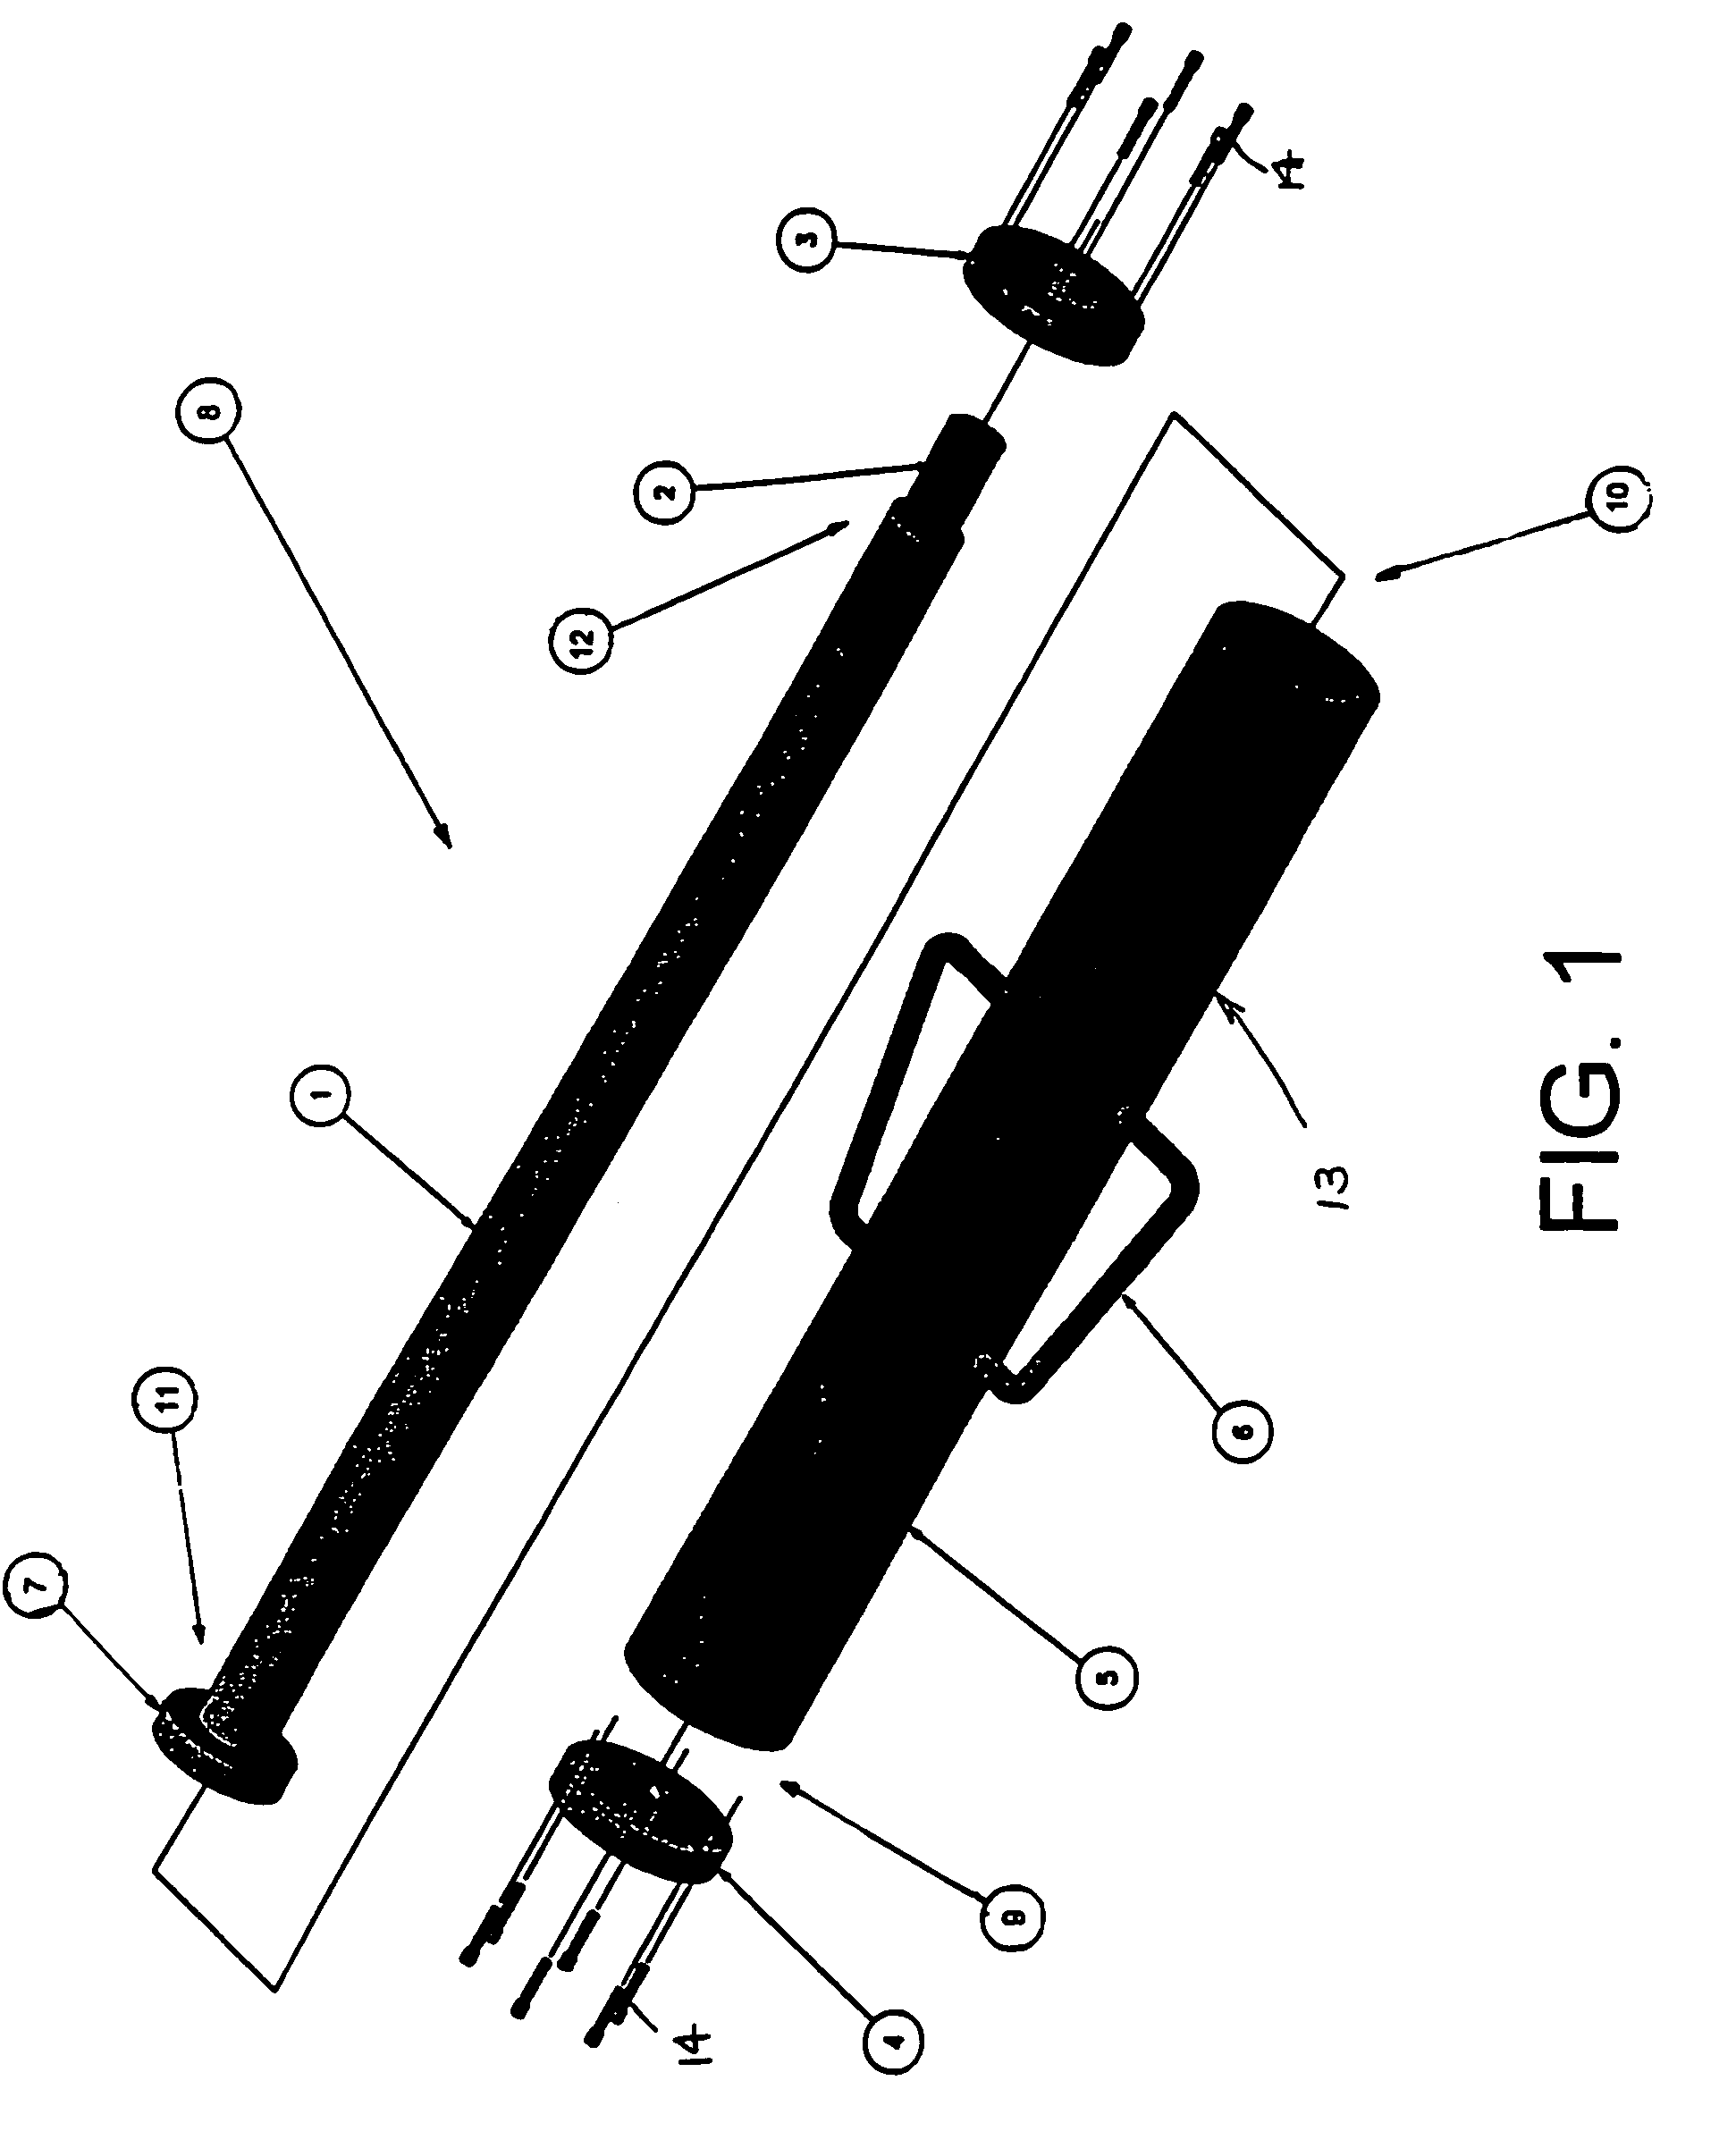 Safety drive hammer for a dynamic cone penetrometer